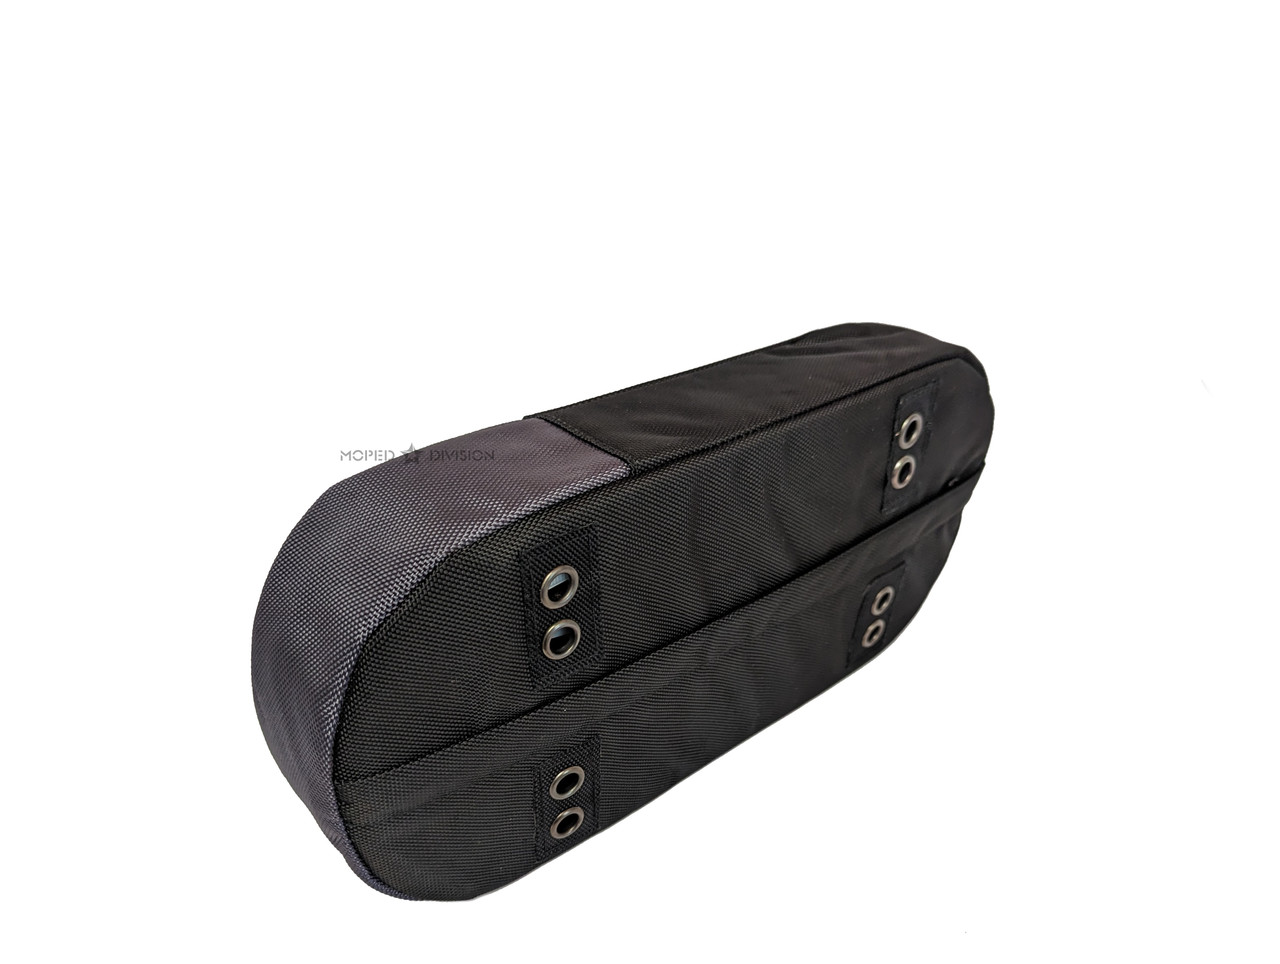 Rear Seat Cushion for Luggage Rack - Recycled Plastic, Black